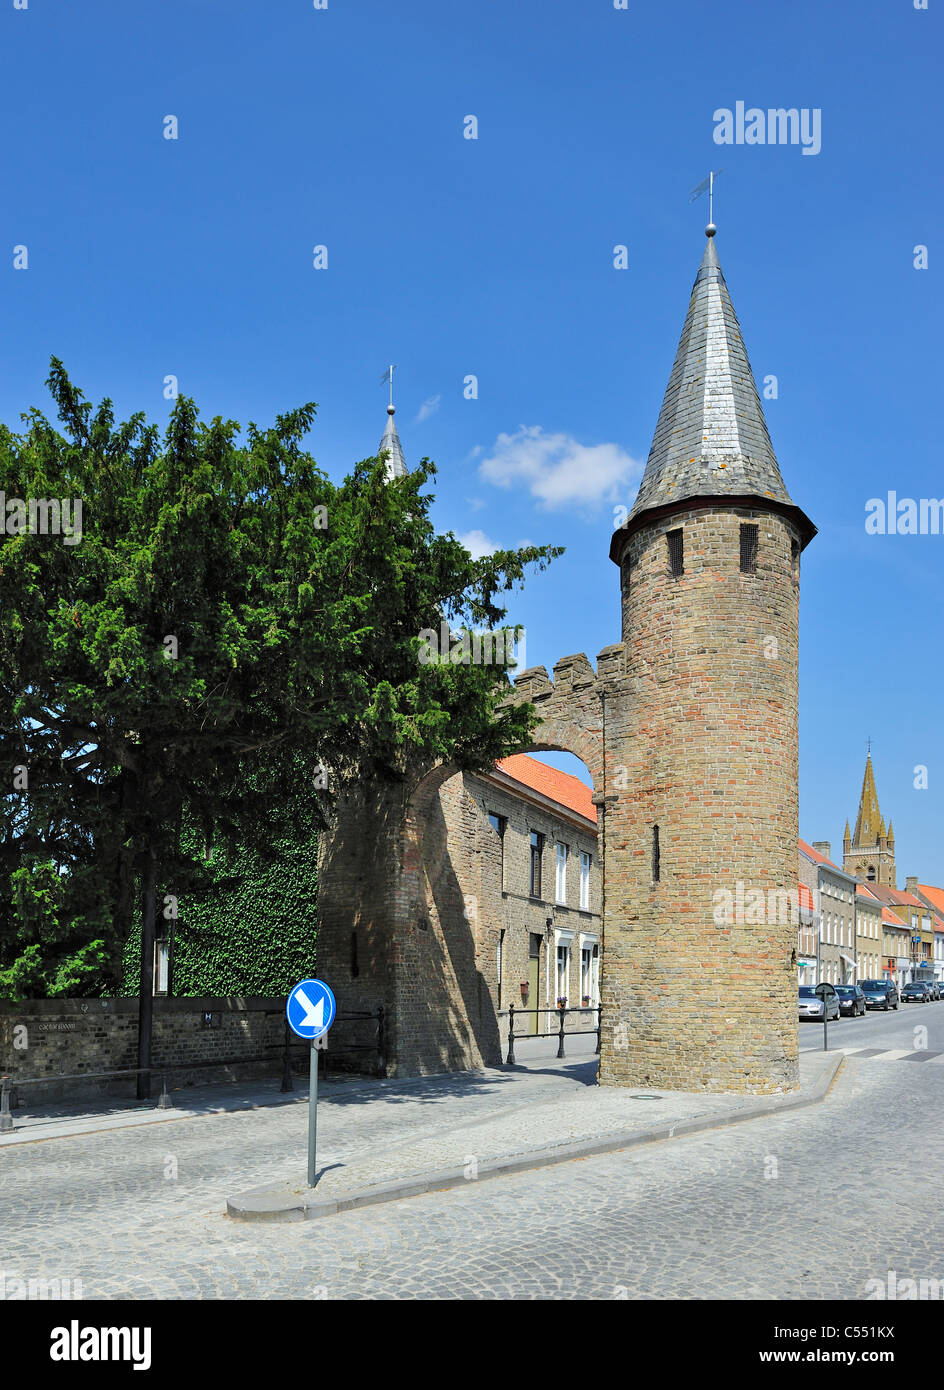 Caesar's tree, an old taxus tree near the West Gate at Lo-Reninge, Belgium Stock Photo